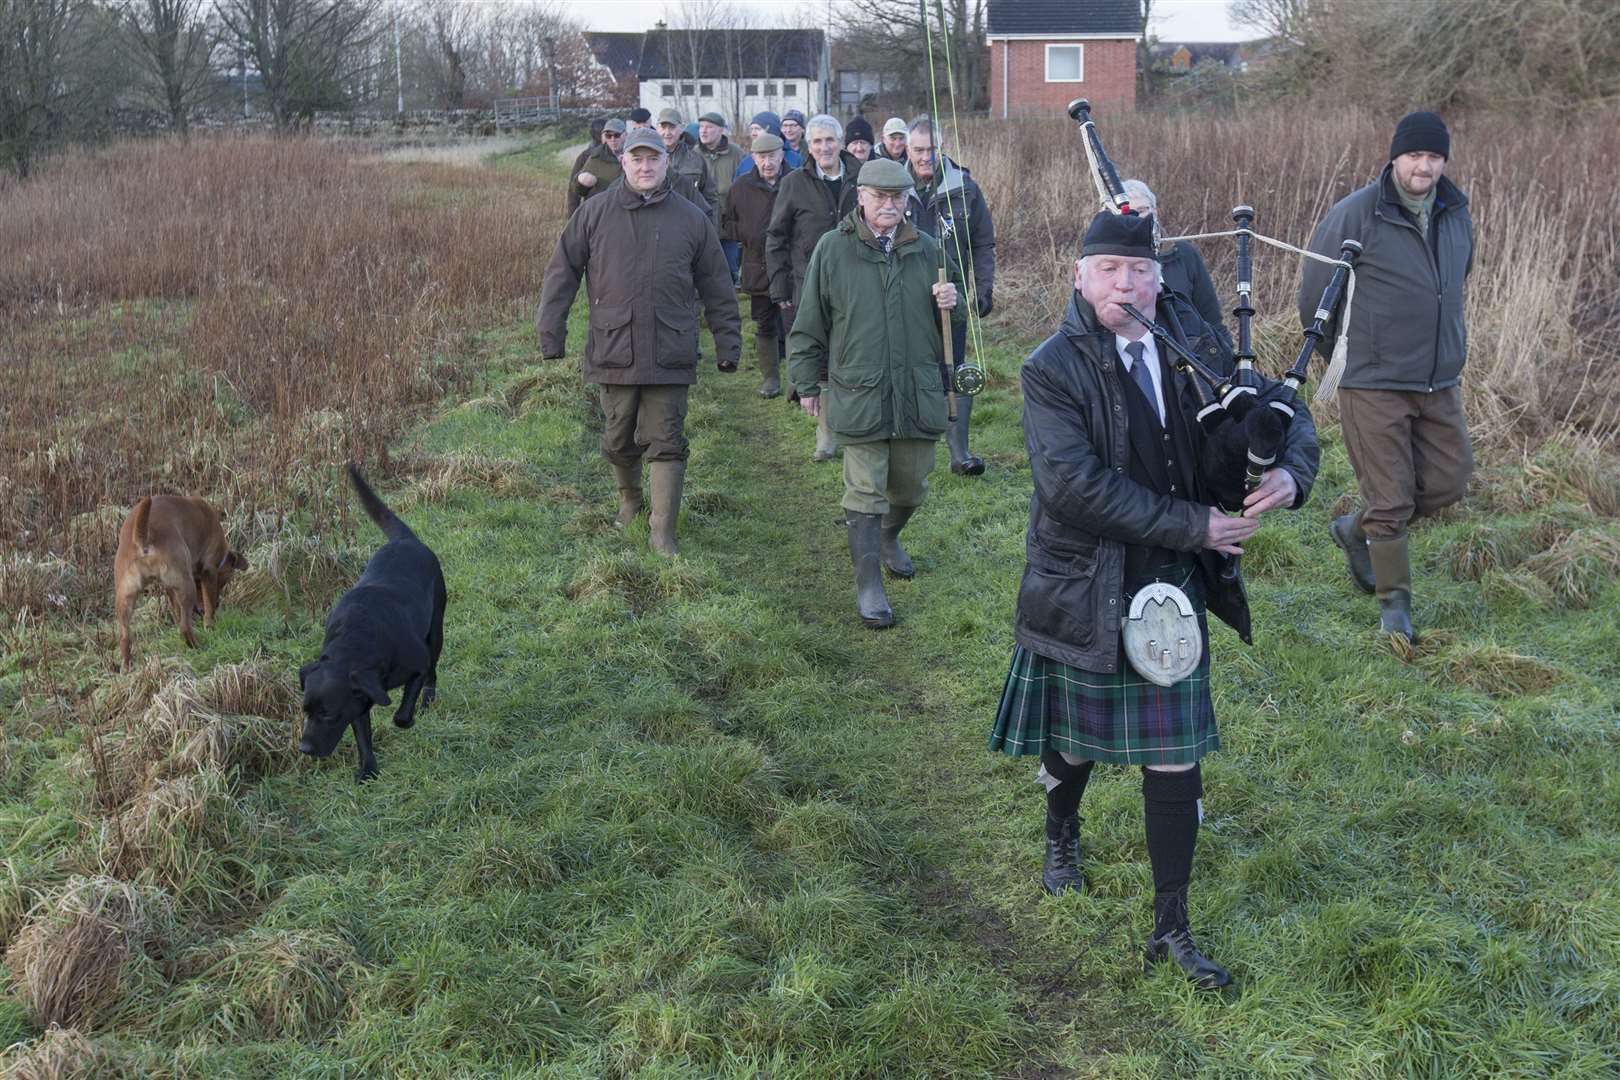 Piper Alasdair Miller leads the anglers along the river bank for the ceremony marking the start of the 2023 season. Picture: Robert MacDonald / Northern Studios